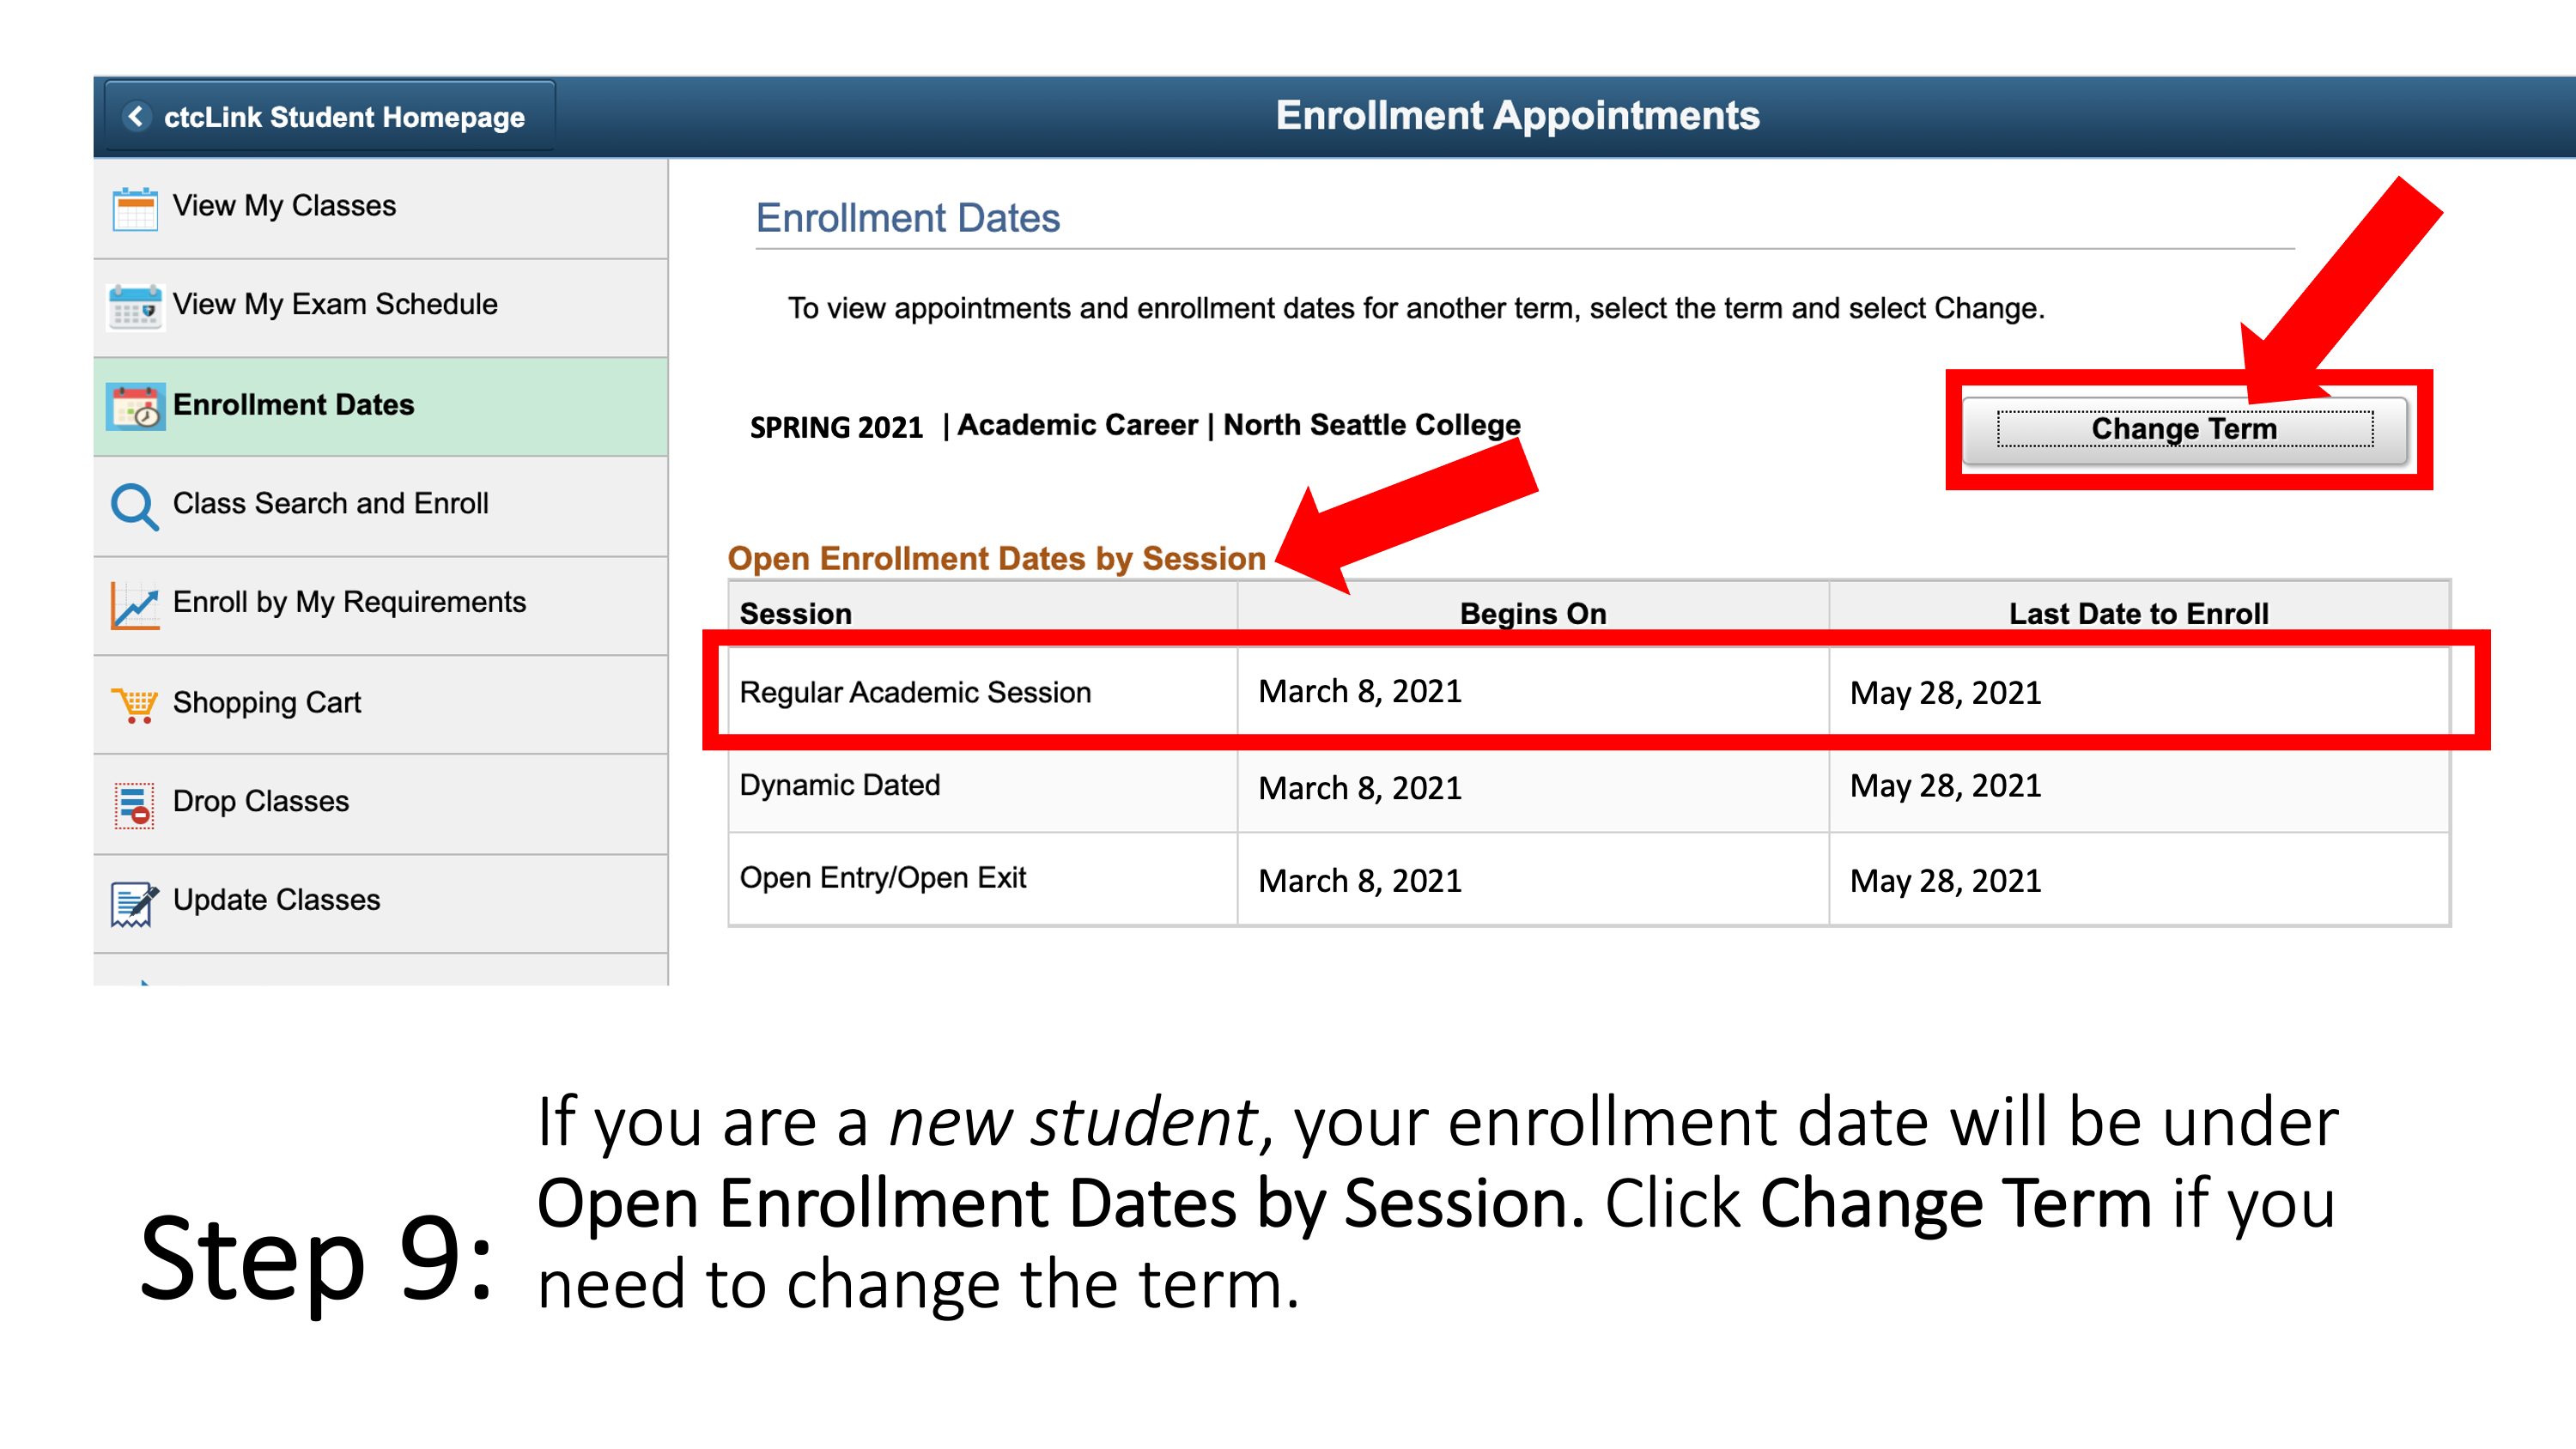 If you are a new student, your enrollment date will be under Open Enrollment Dates by Session. Click Change Term if you need to change the term.